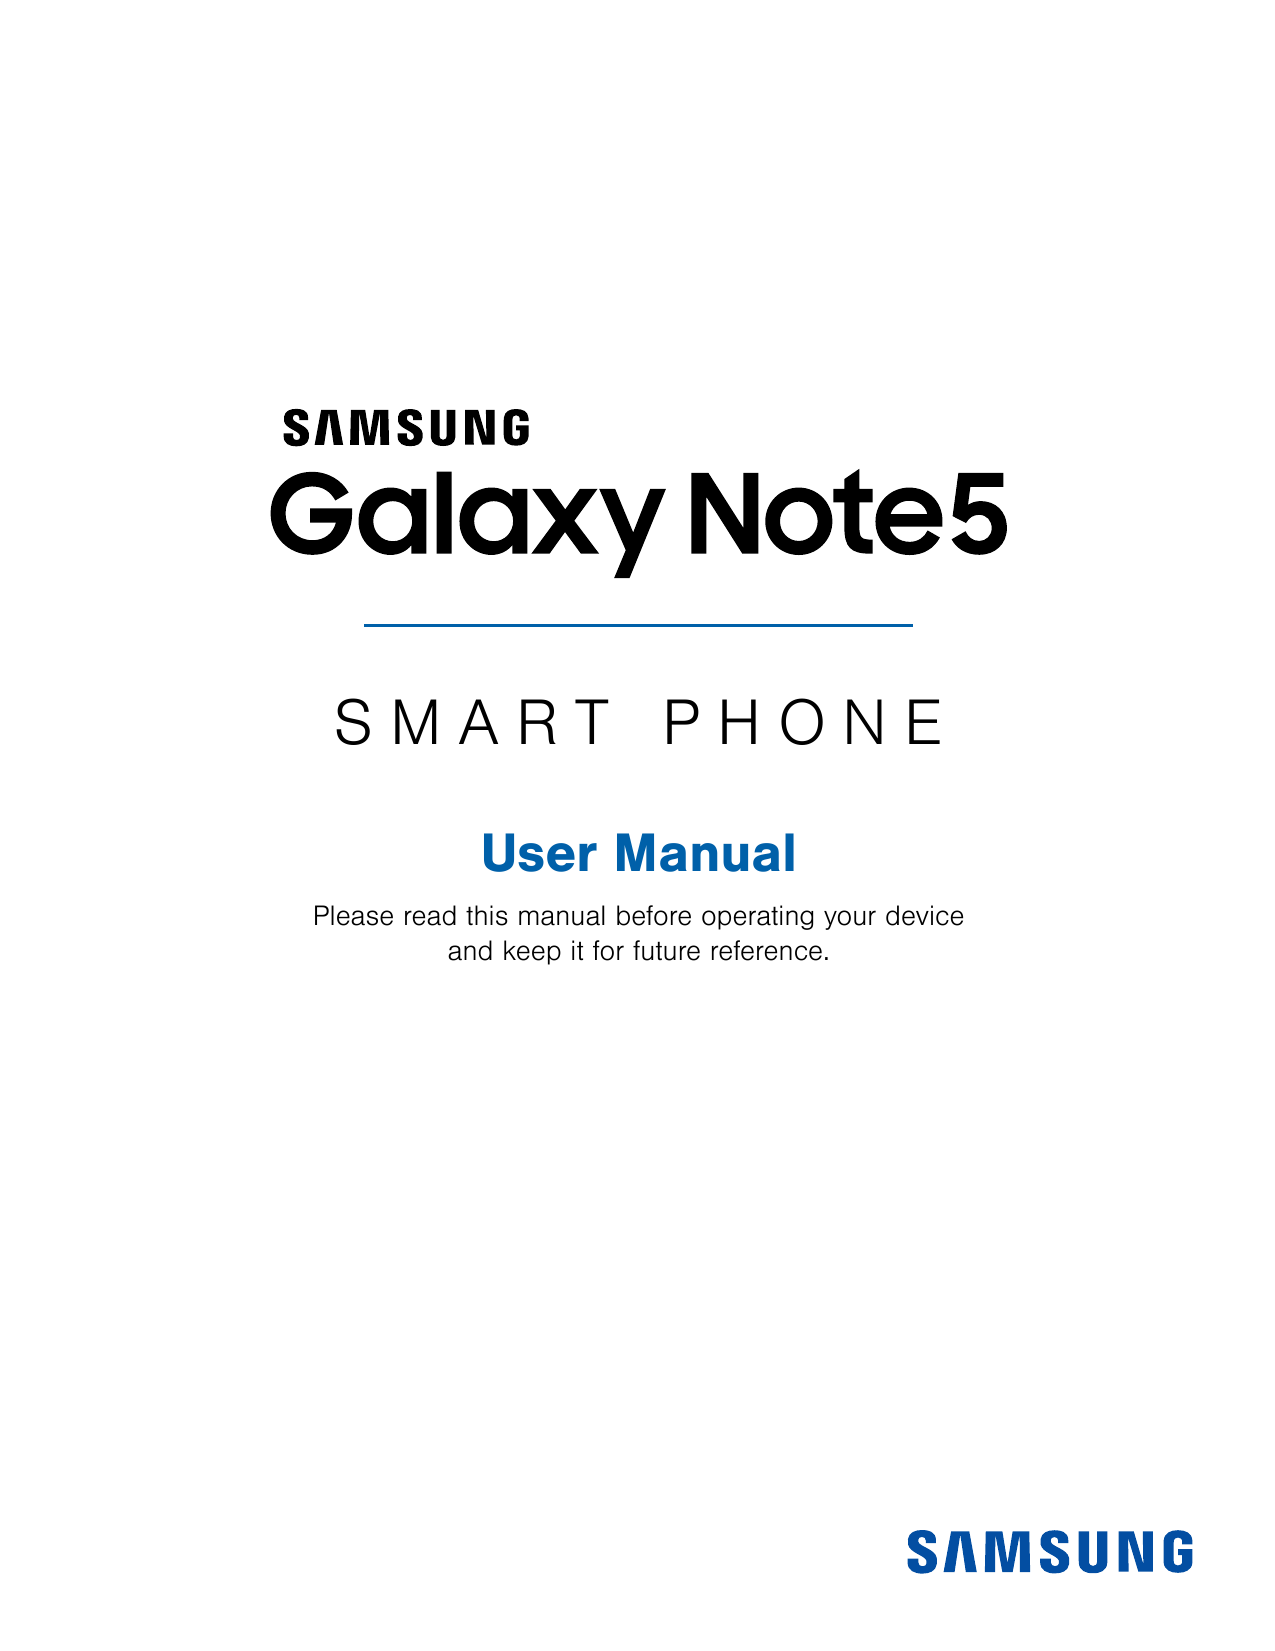 SMART PHONEUser ManualPlease read this manual before operating your deviceand keep it for future reference.